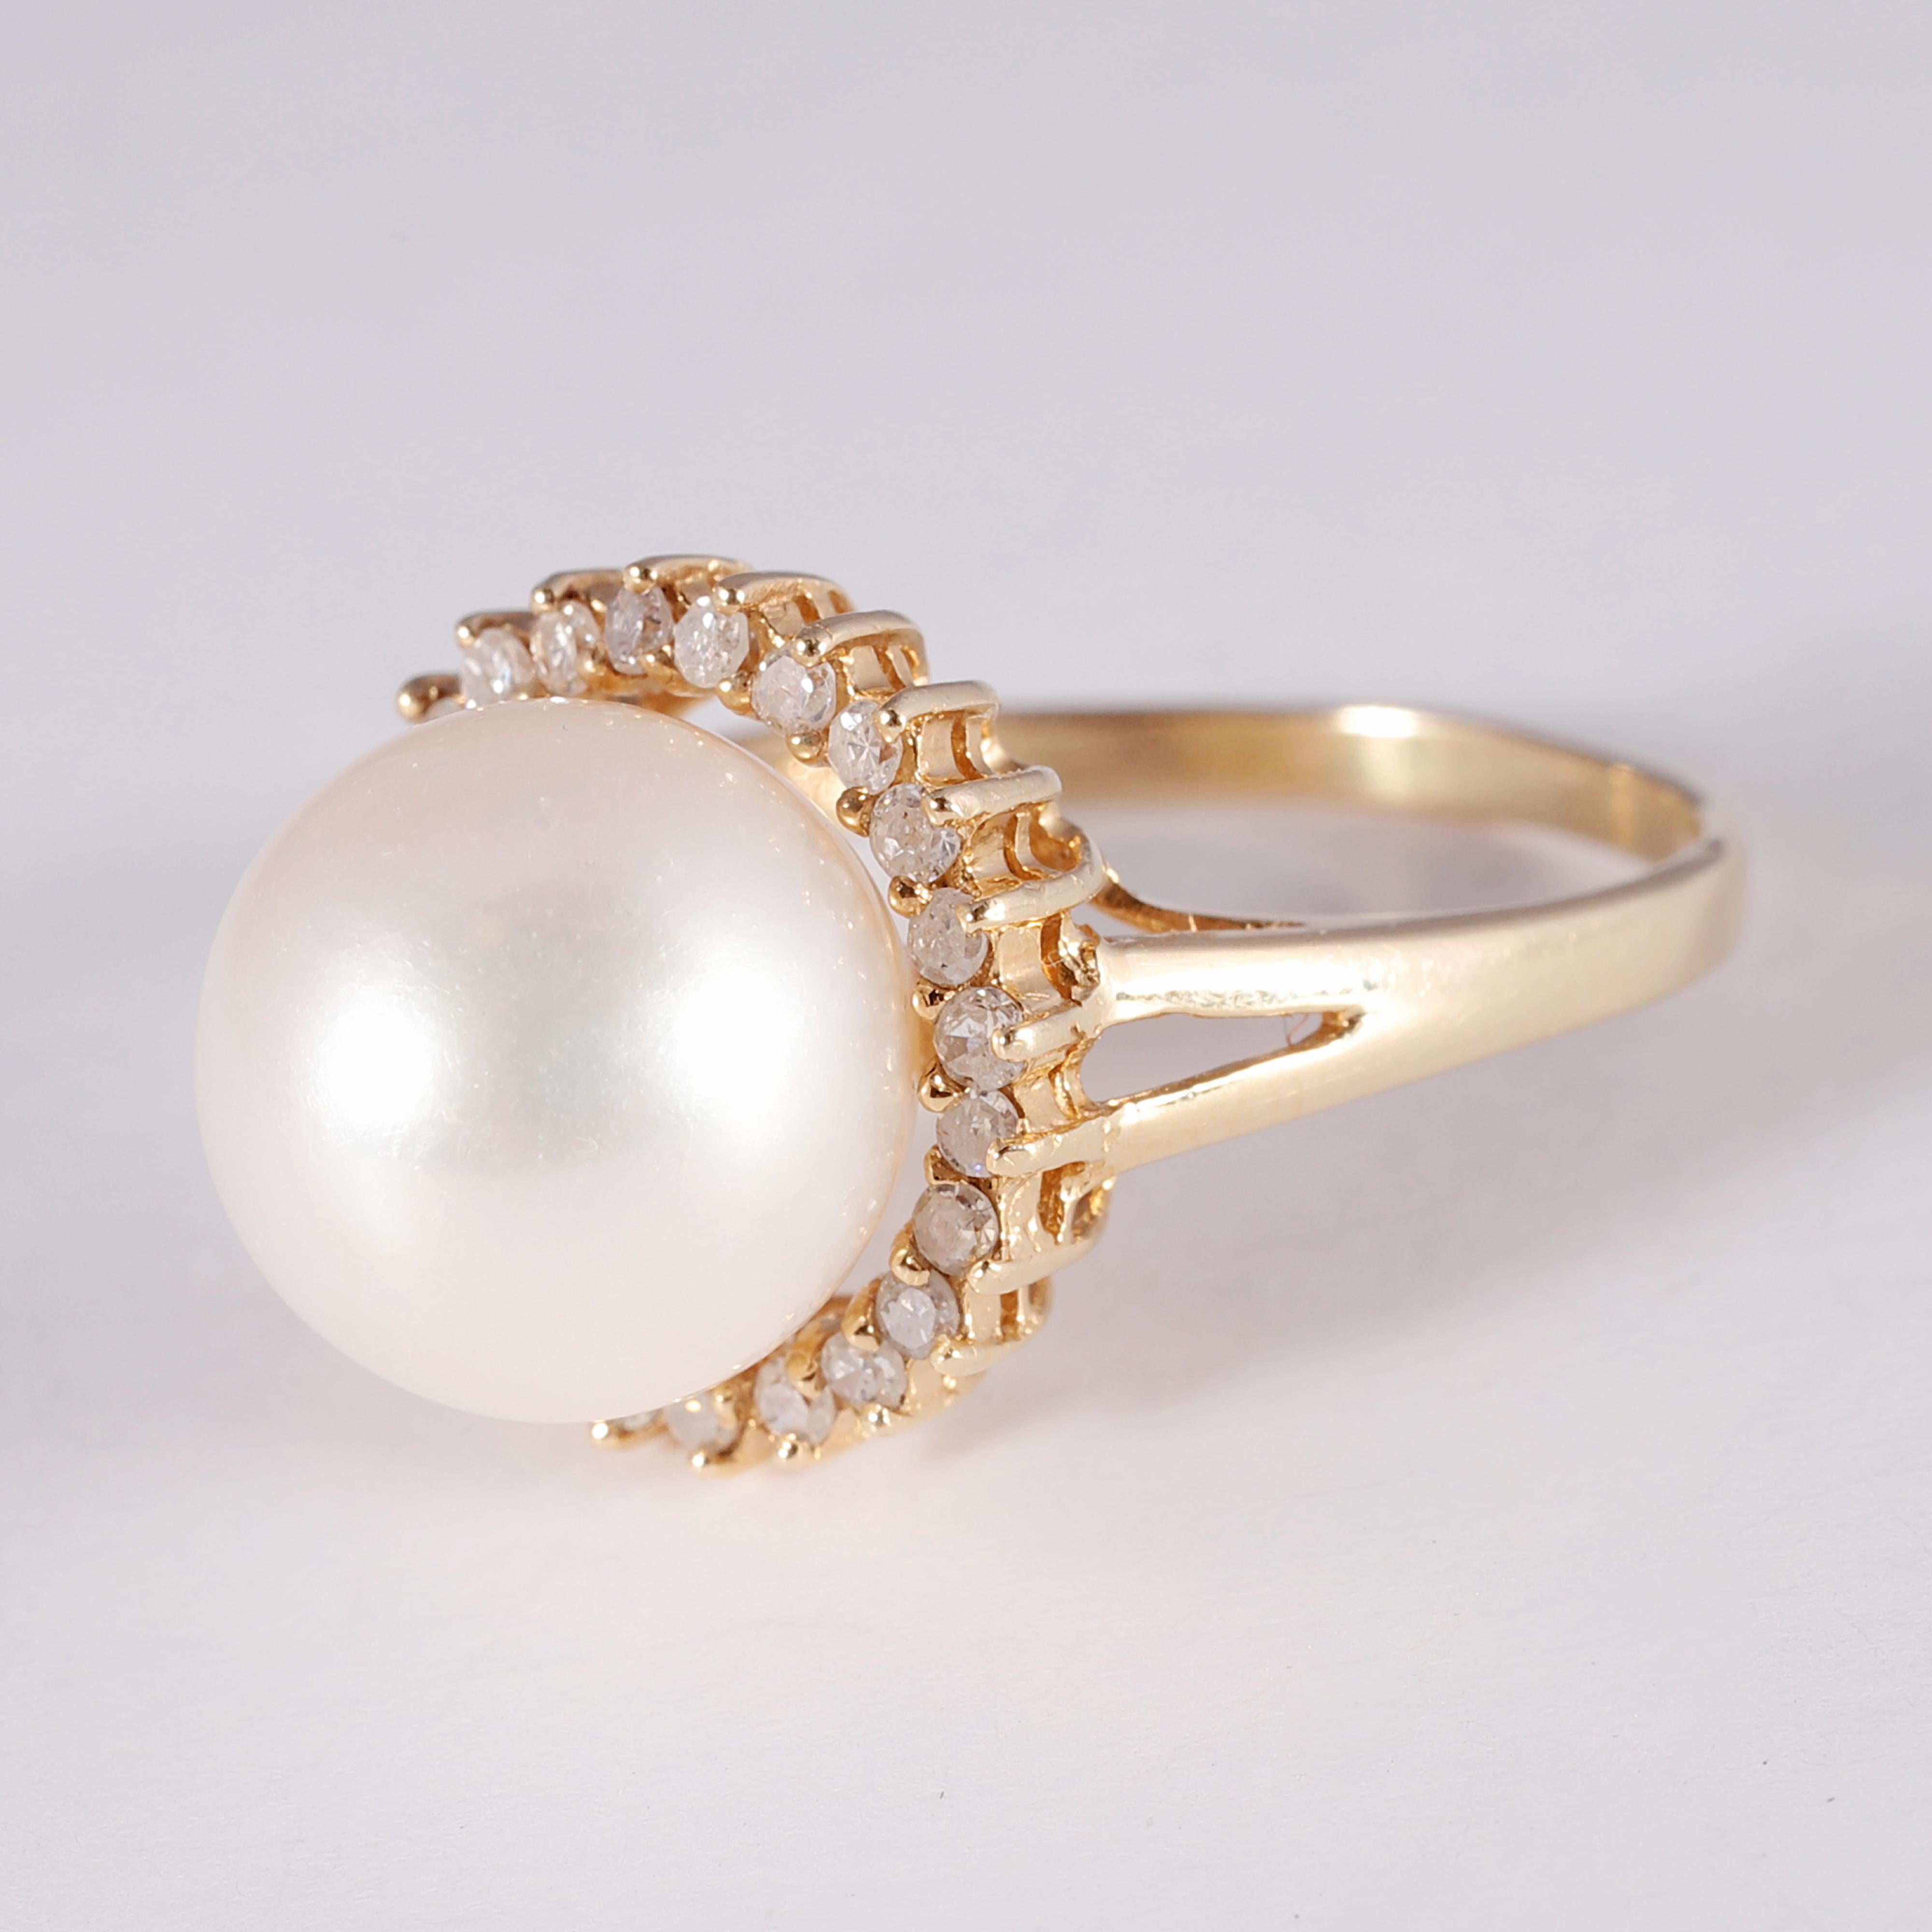 Such a lovely 10.00 mm freshwater cultured pearl is at the center of this 14 karat yellow gold ring!  It is surrounded by 0.28 carats of prong-set, round diamonds and is a size 7 3/4.